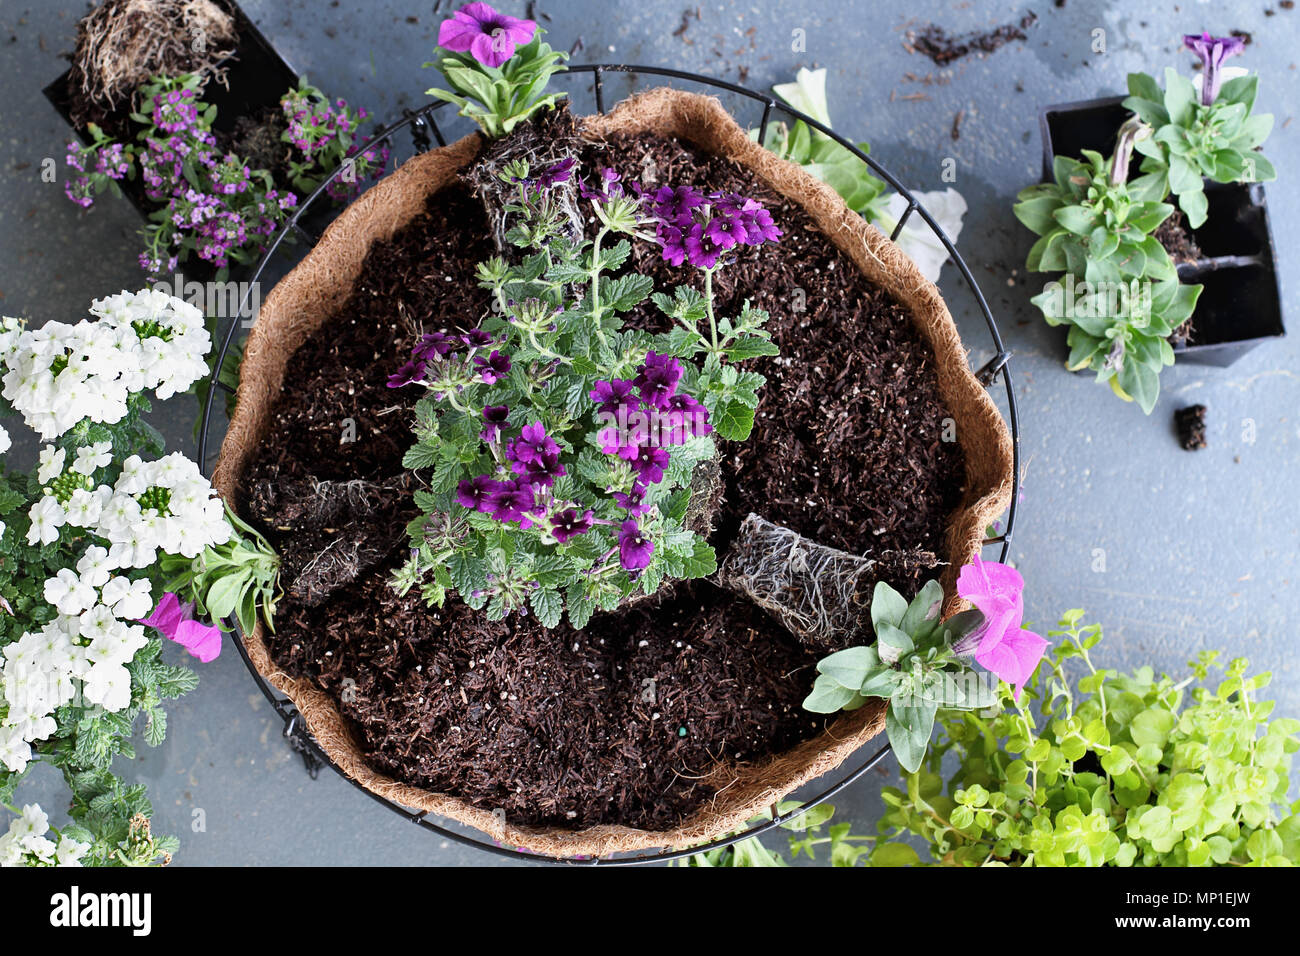 Demonstration of how to plant a hanging basket or pot of flowers. Flowers include Verbena, Petunias, Creeping Jenny and Alyssum. Image shot from above Stock Photo